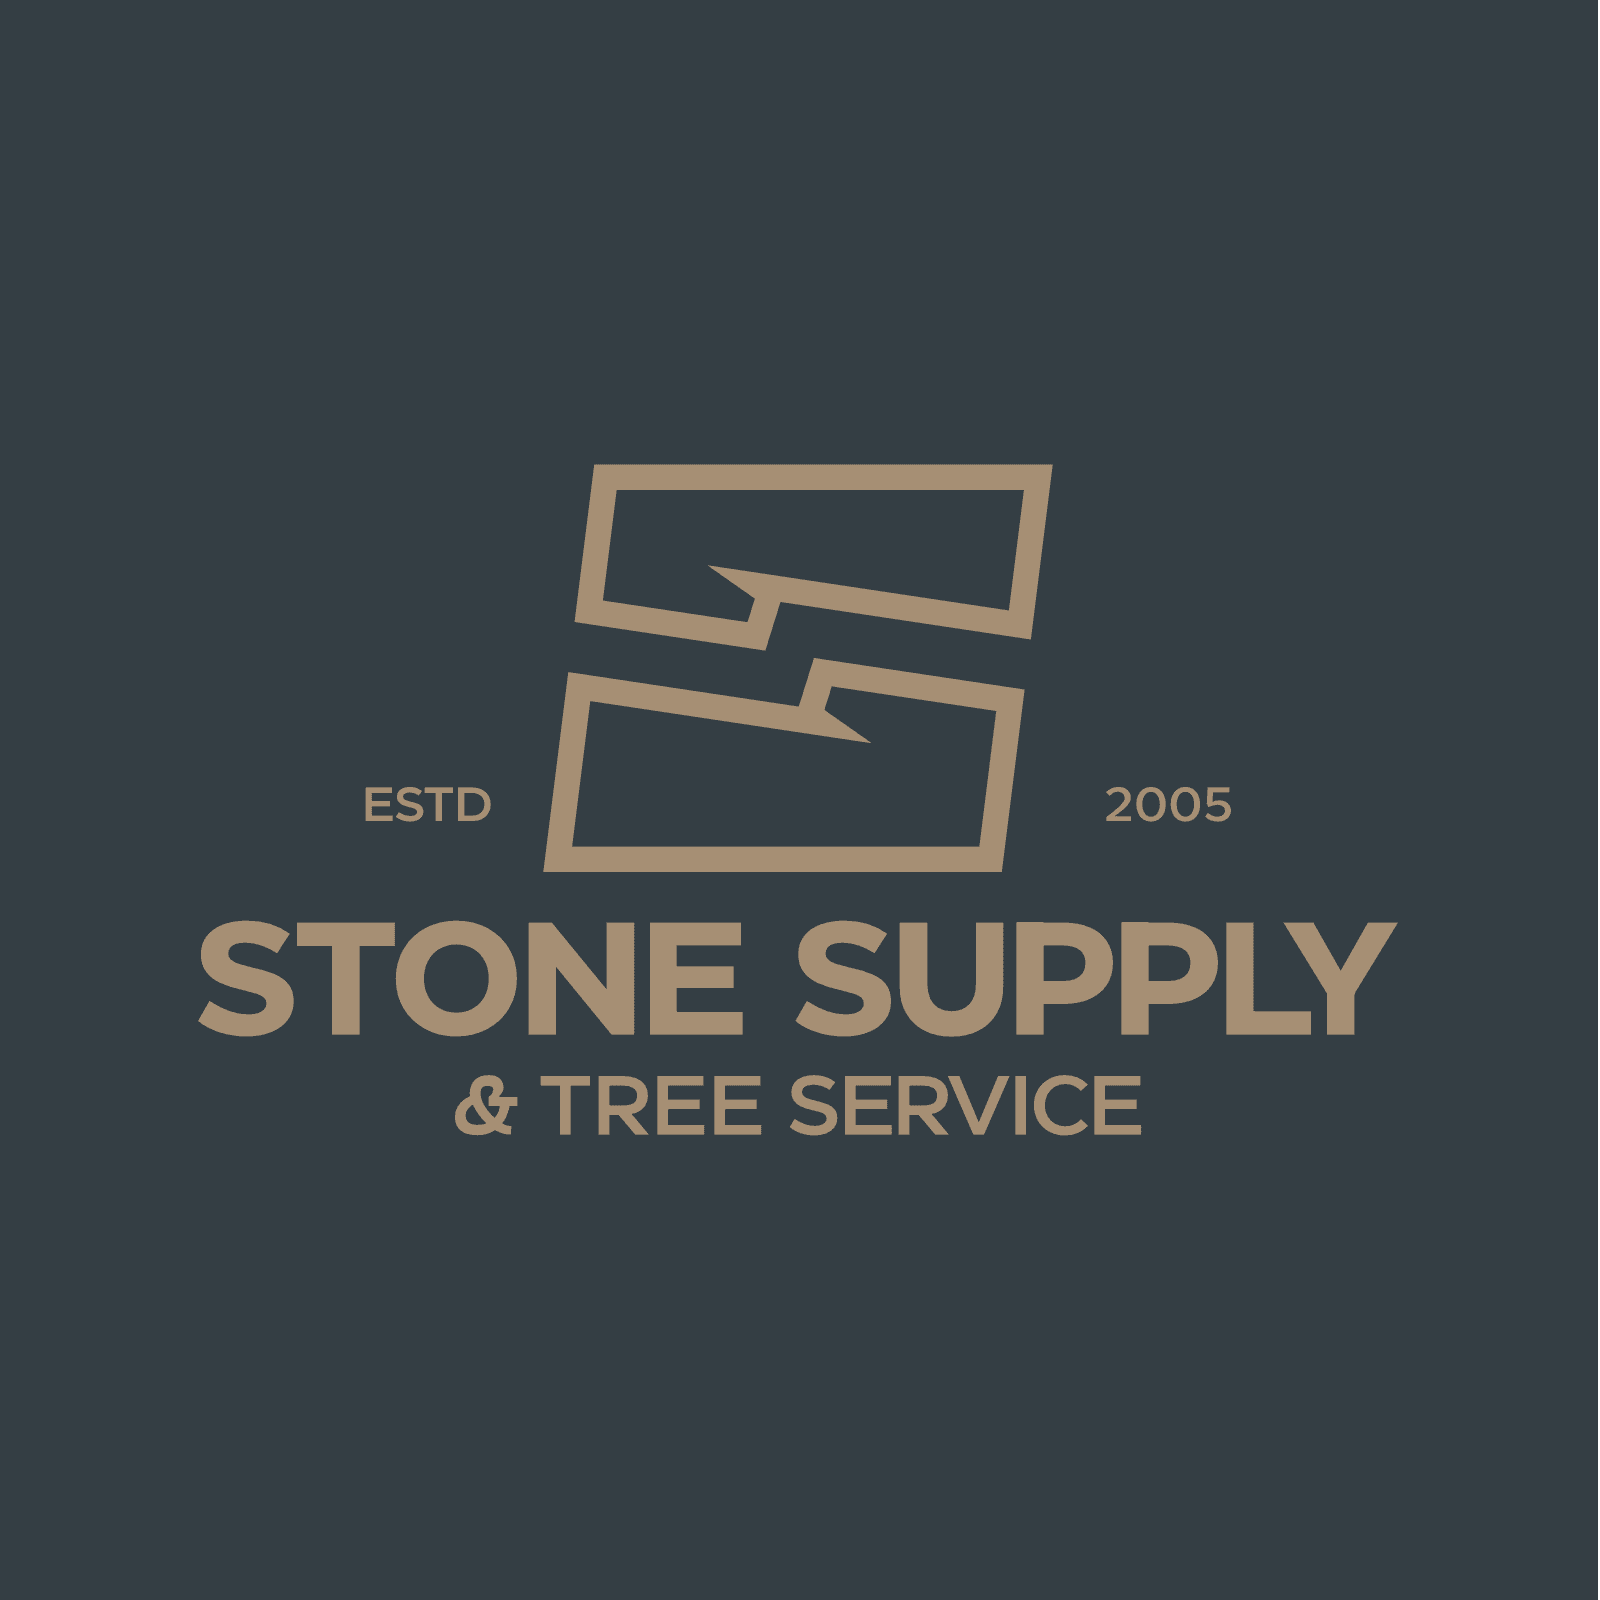 One of the variations of the NJC Stone Supply & Tree Service with logo mark and type logo